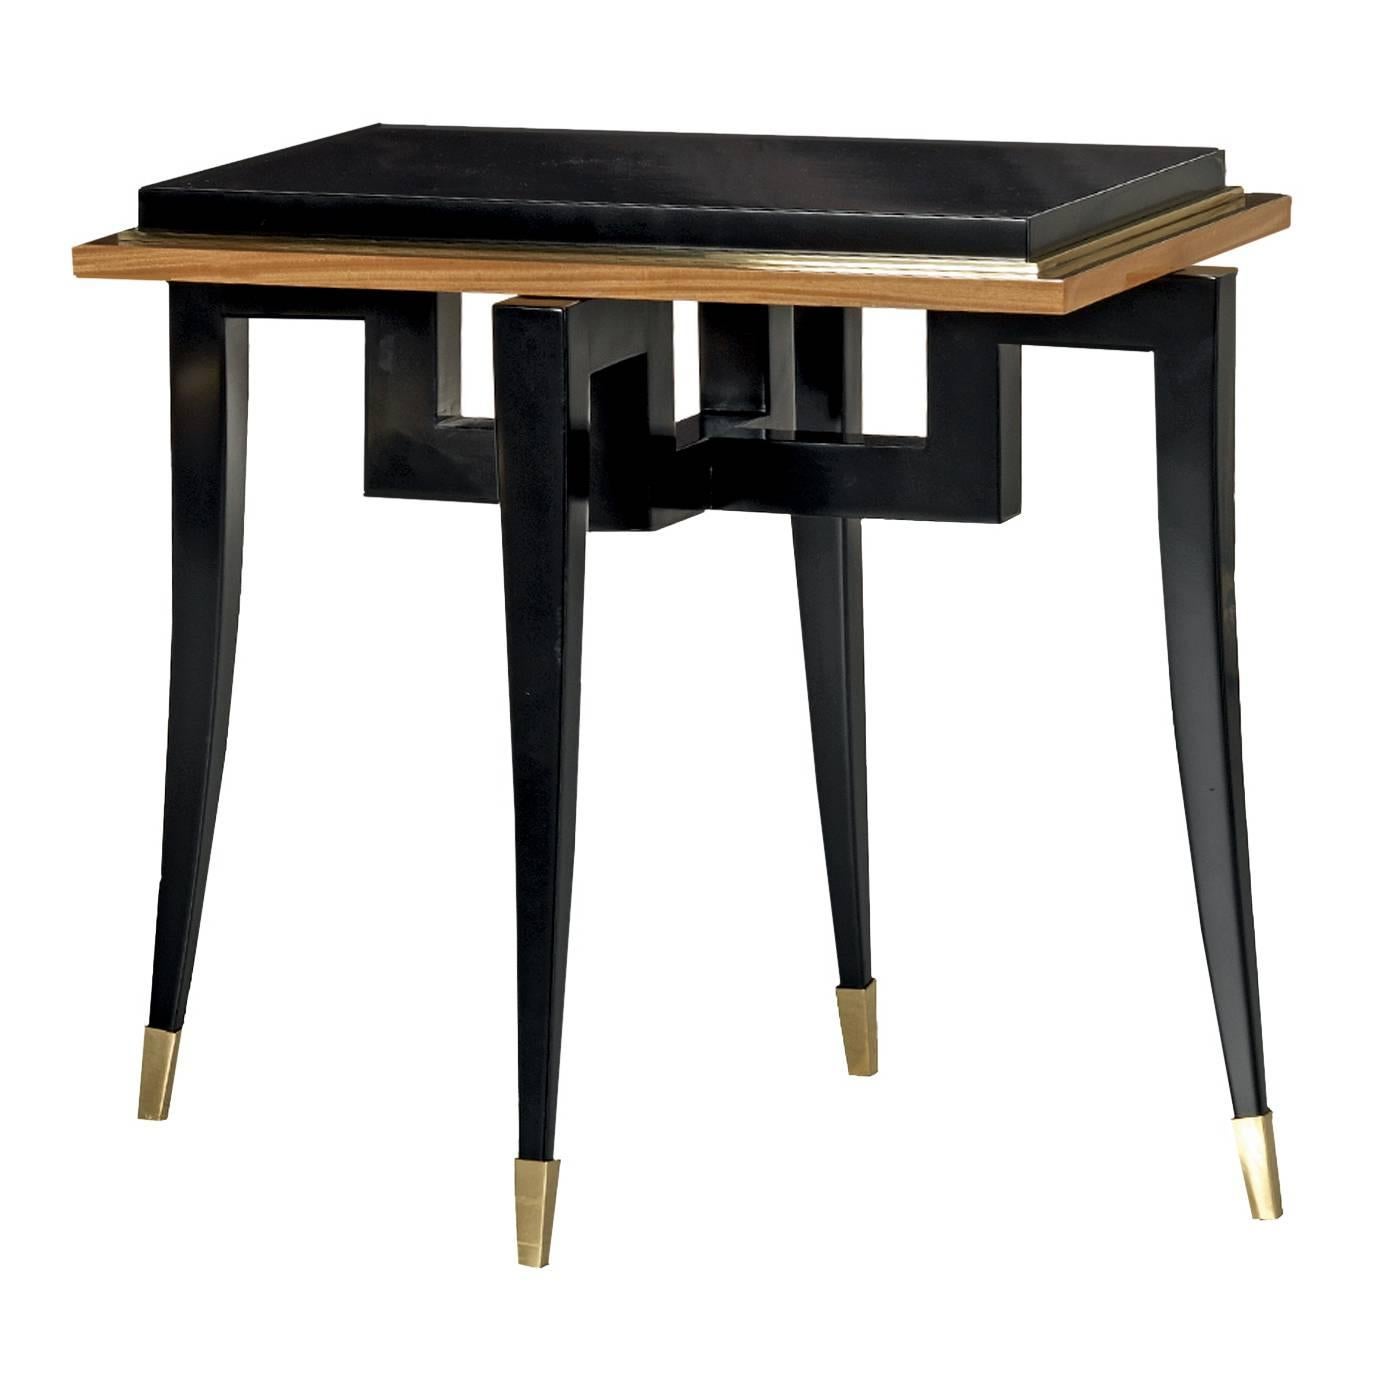 Citronnier Wood Side Table with Black Finish